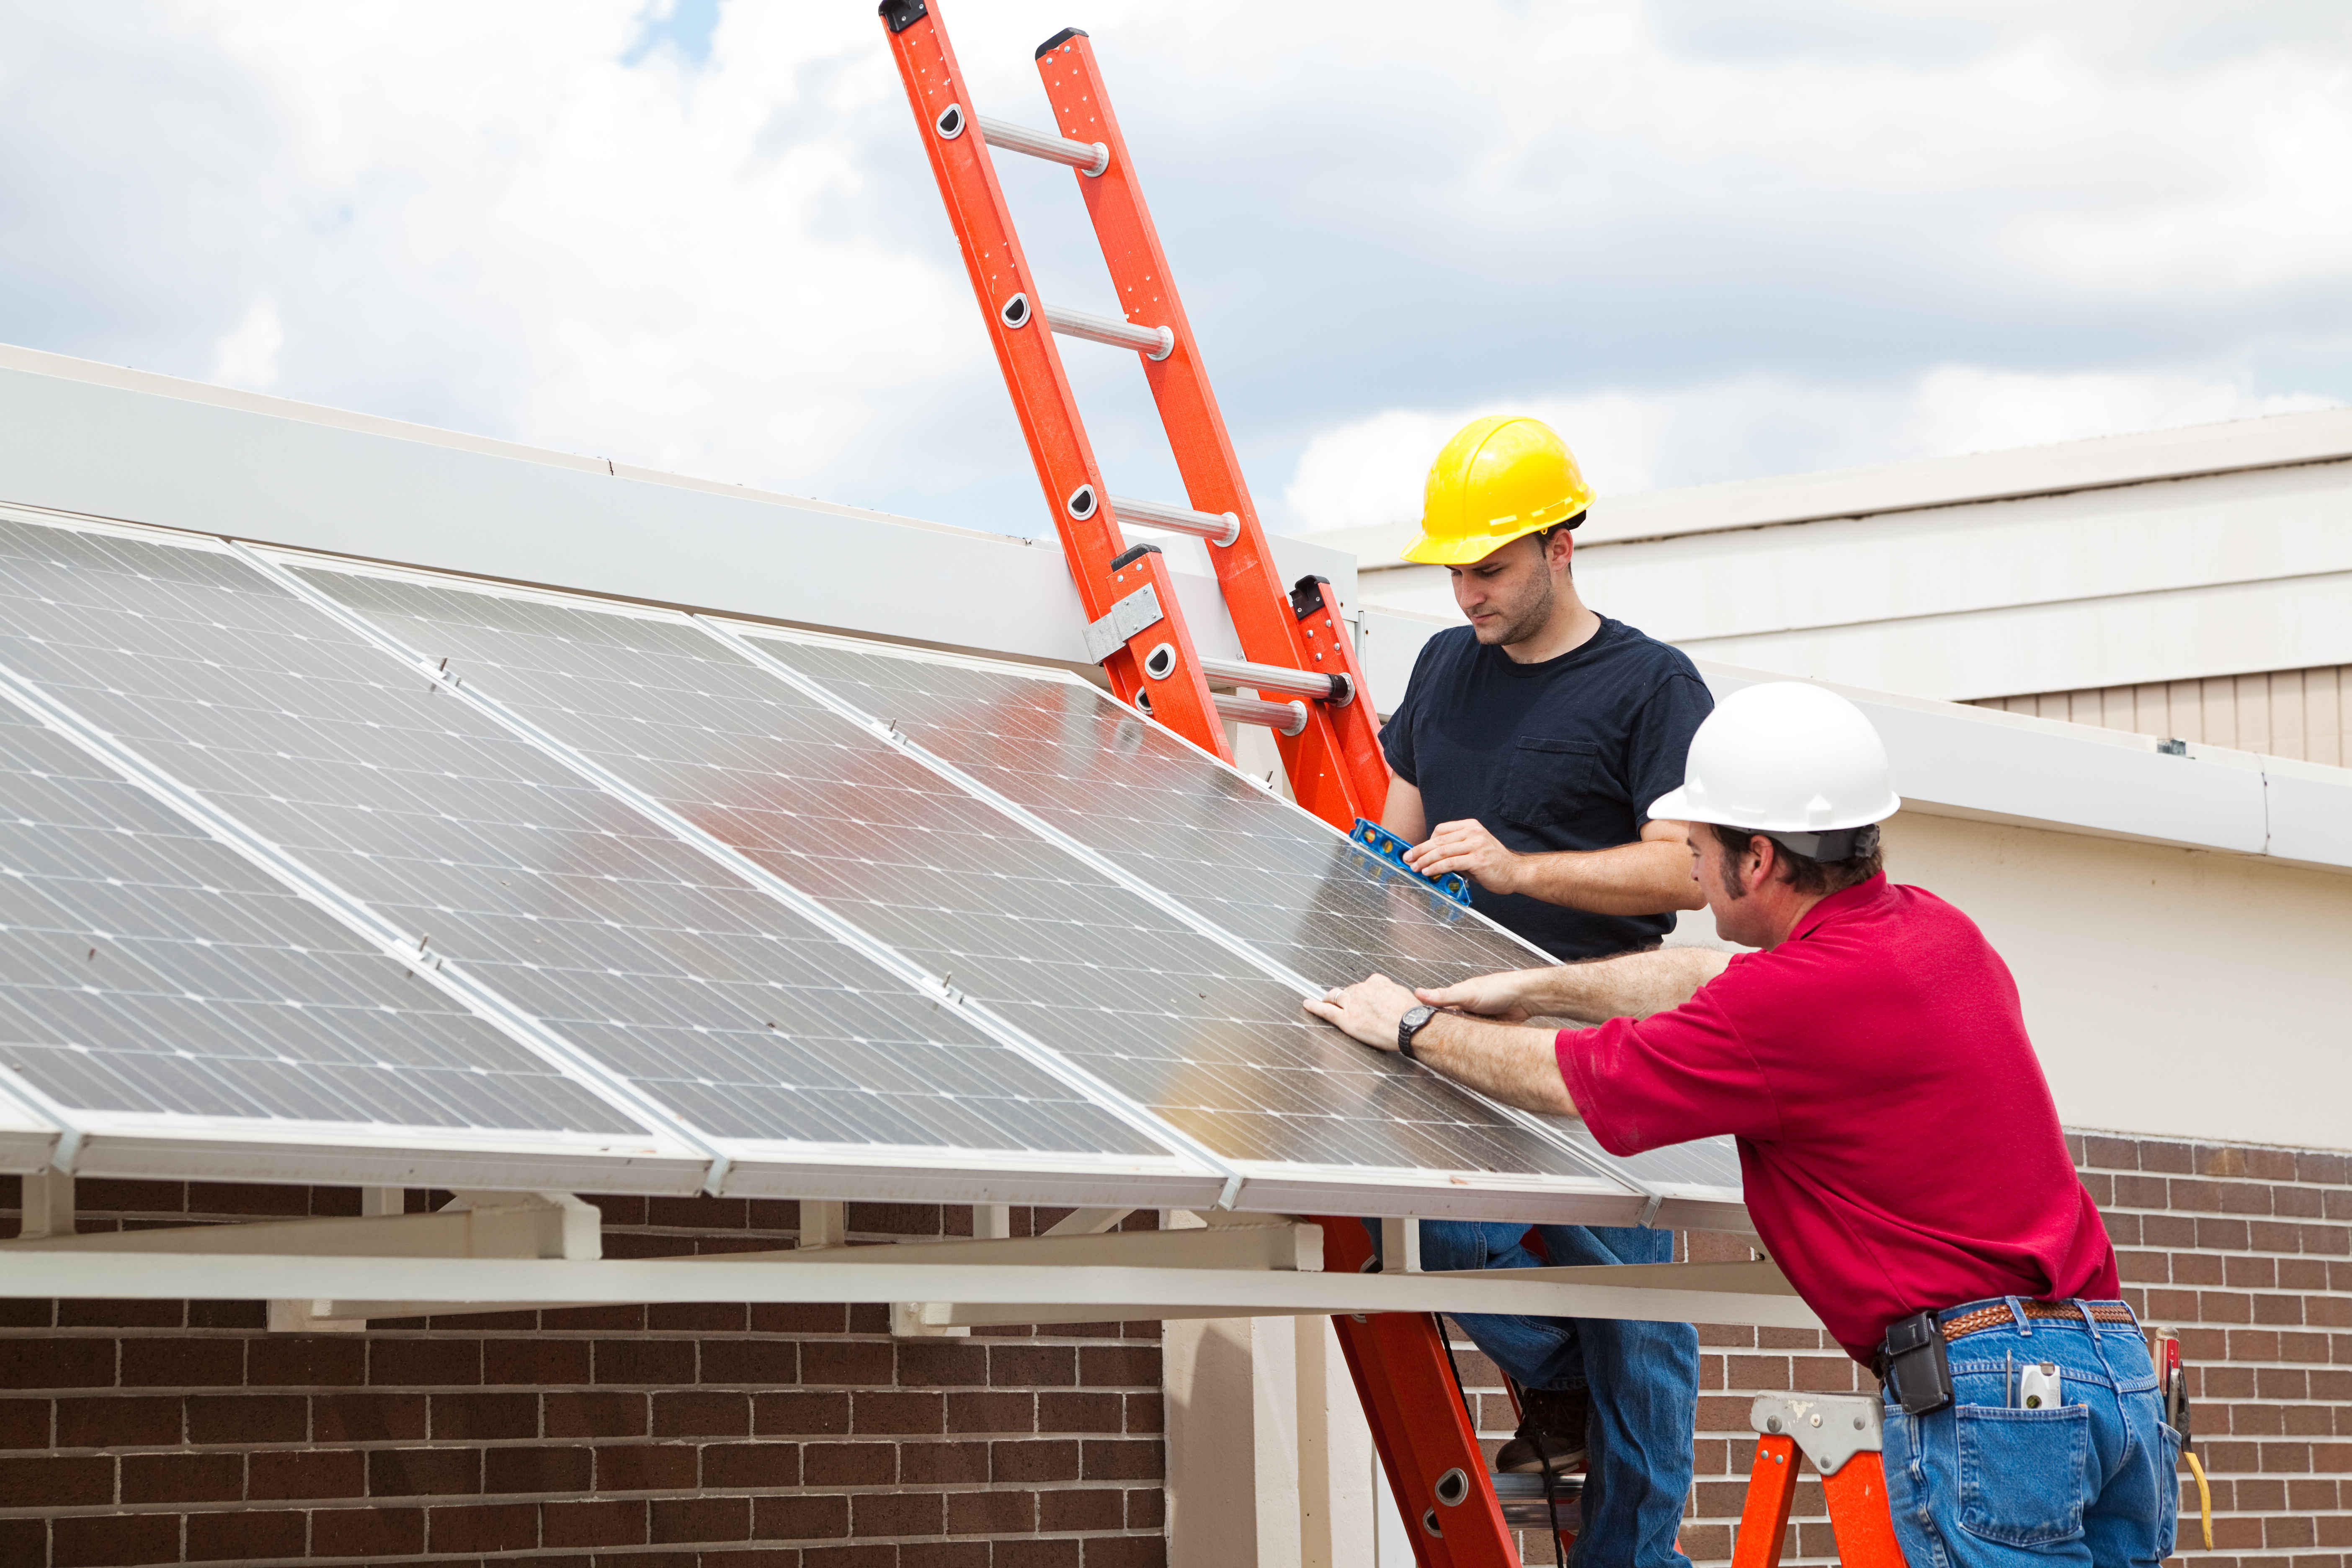 Workers install energy efficient solar panels on the roof of a building.